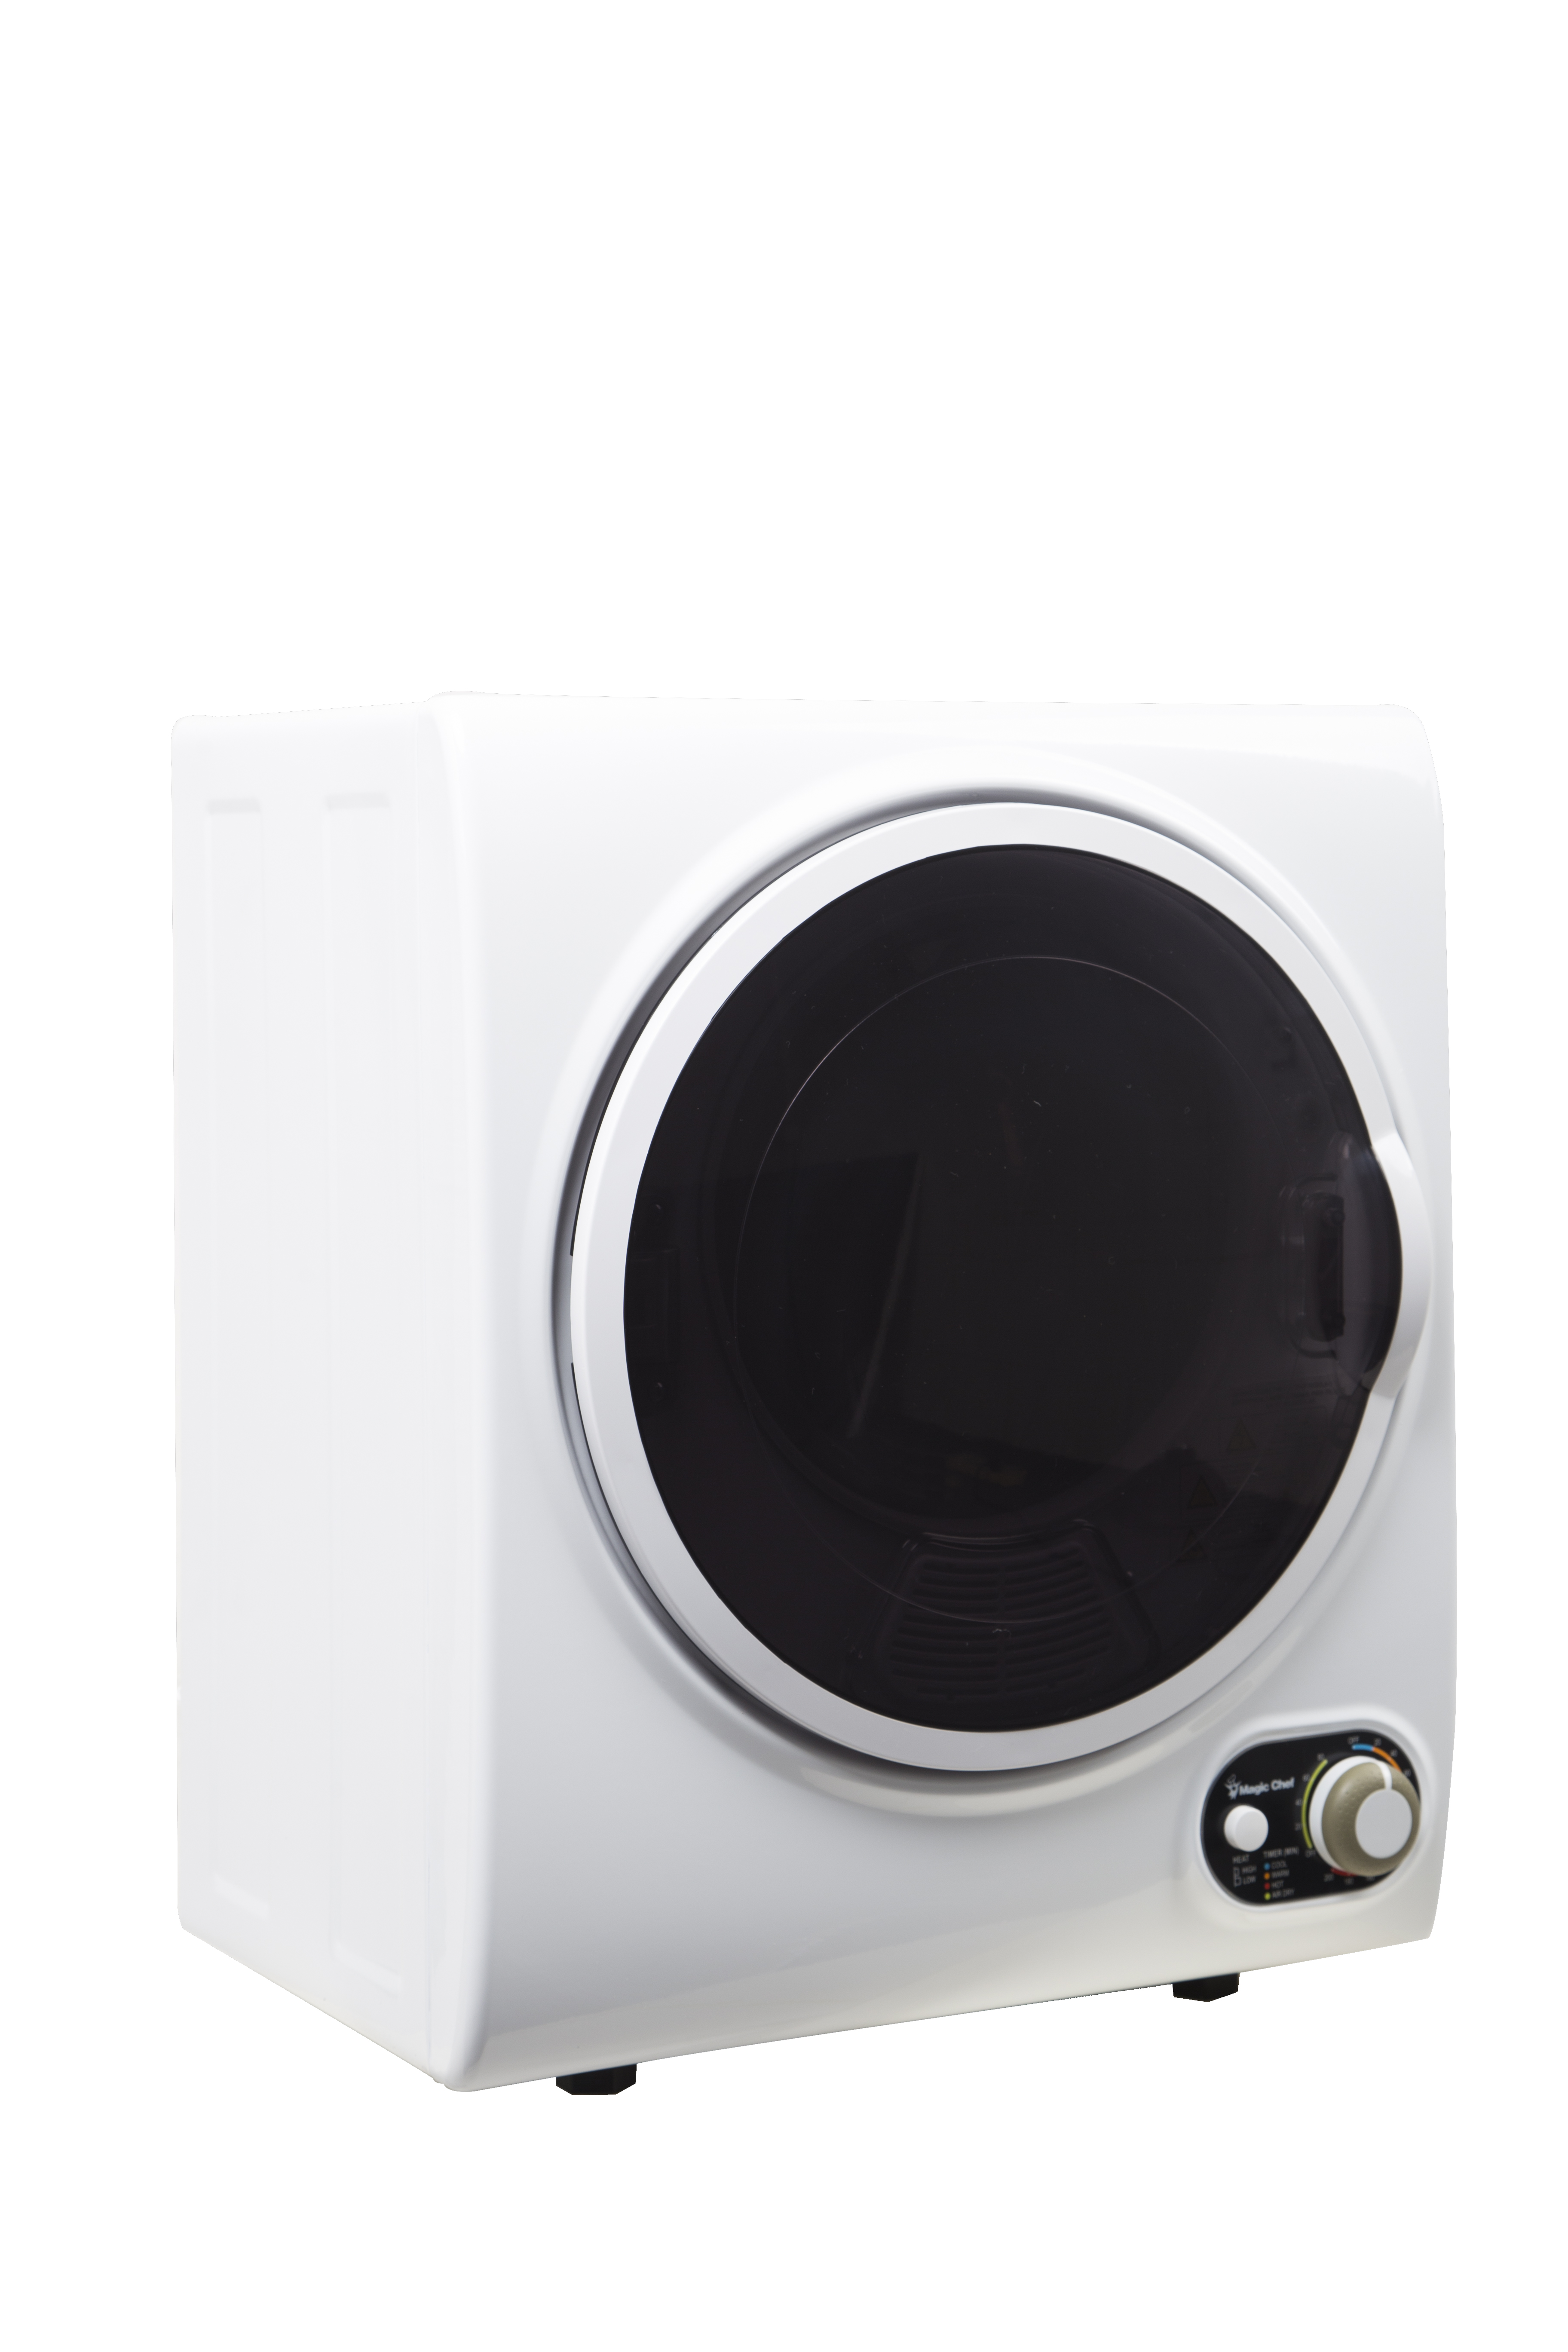 Magic Chef 1.5 Cu. ft. Compact Electric Dryer, White, 19.5 in L x 23.8 in H x 16.1 in D - image 2 of 5